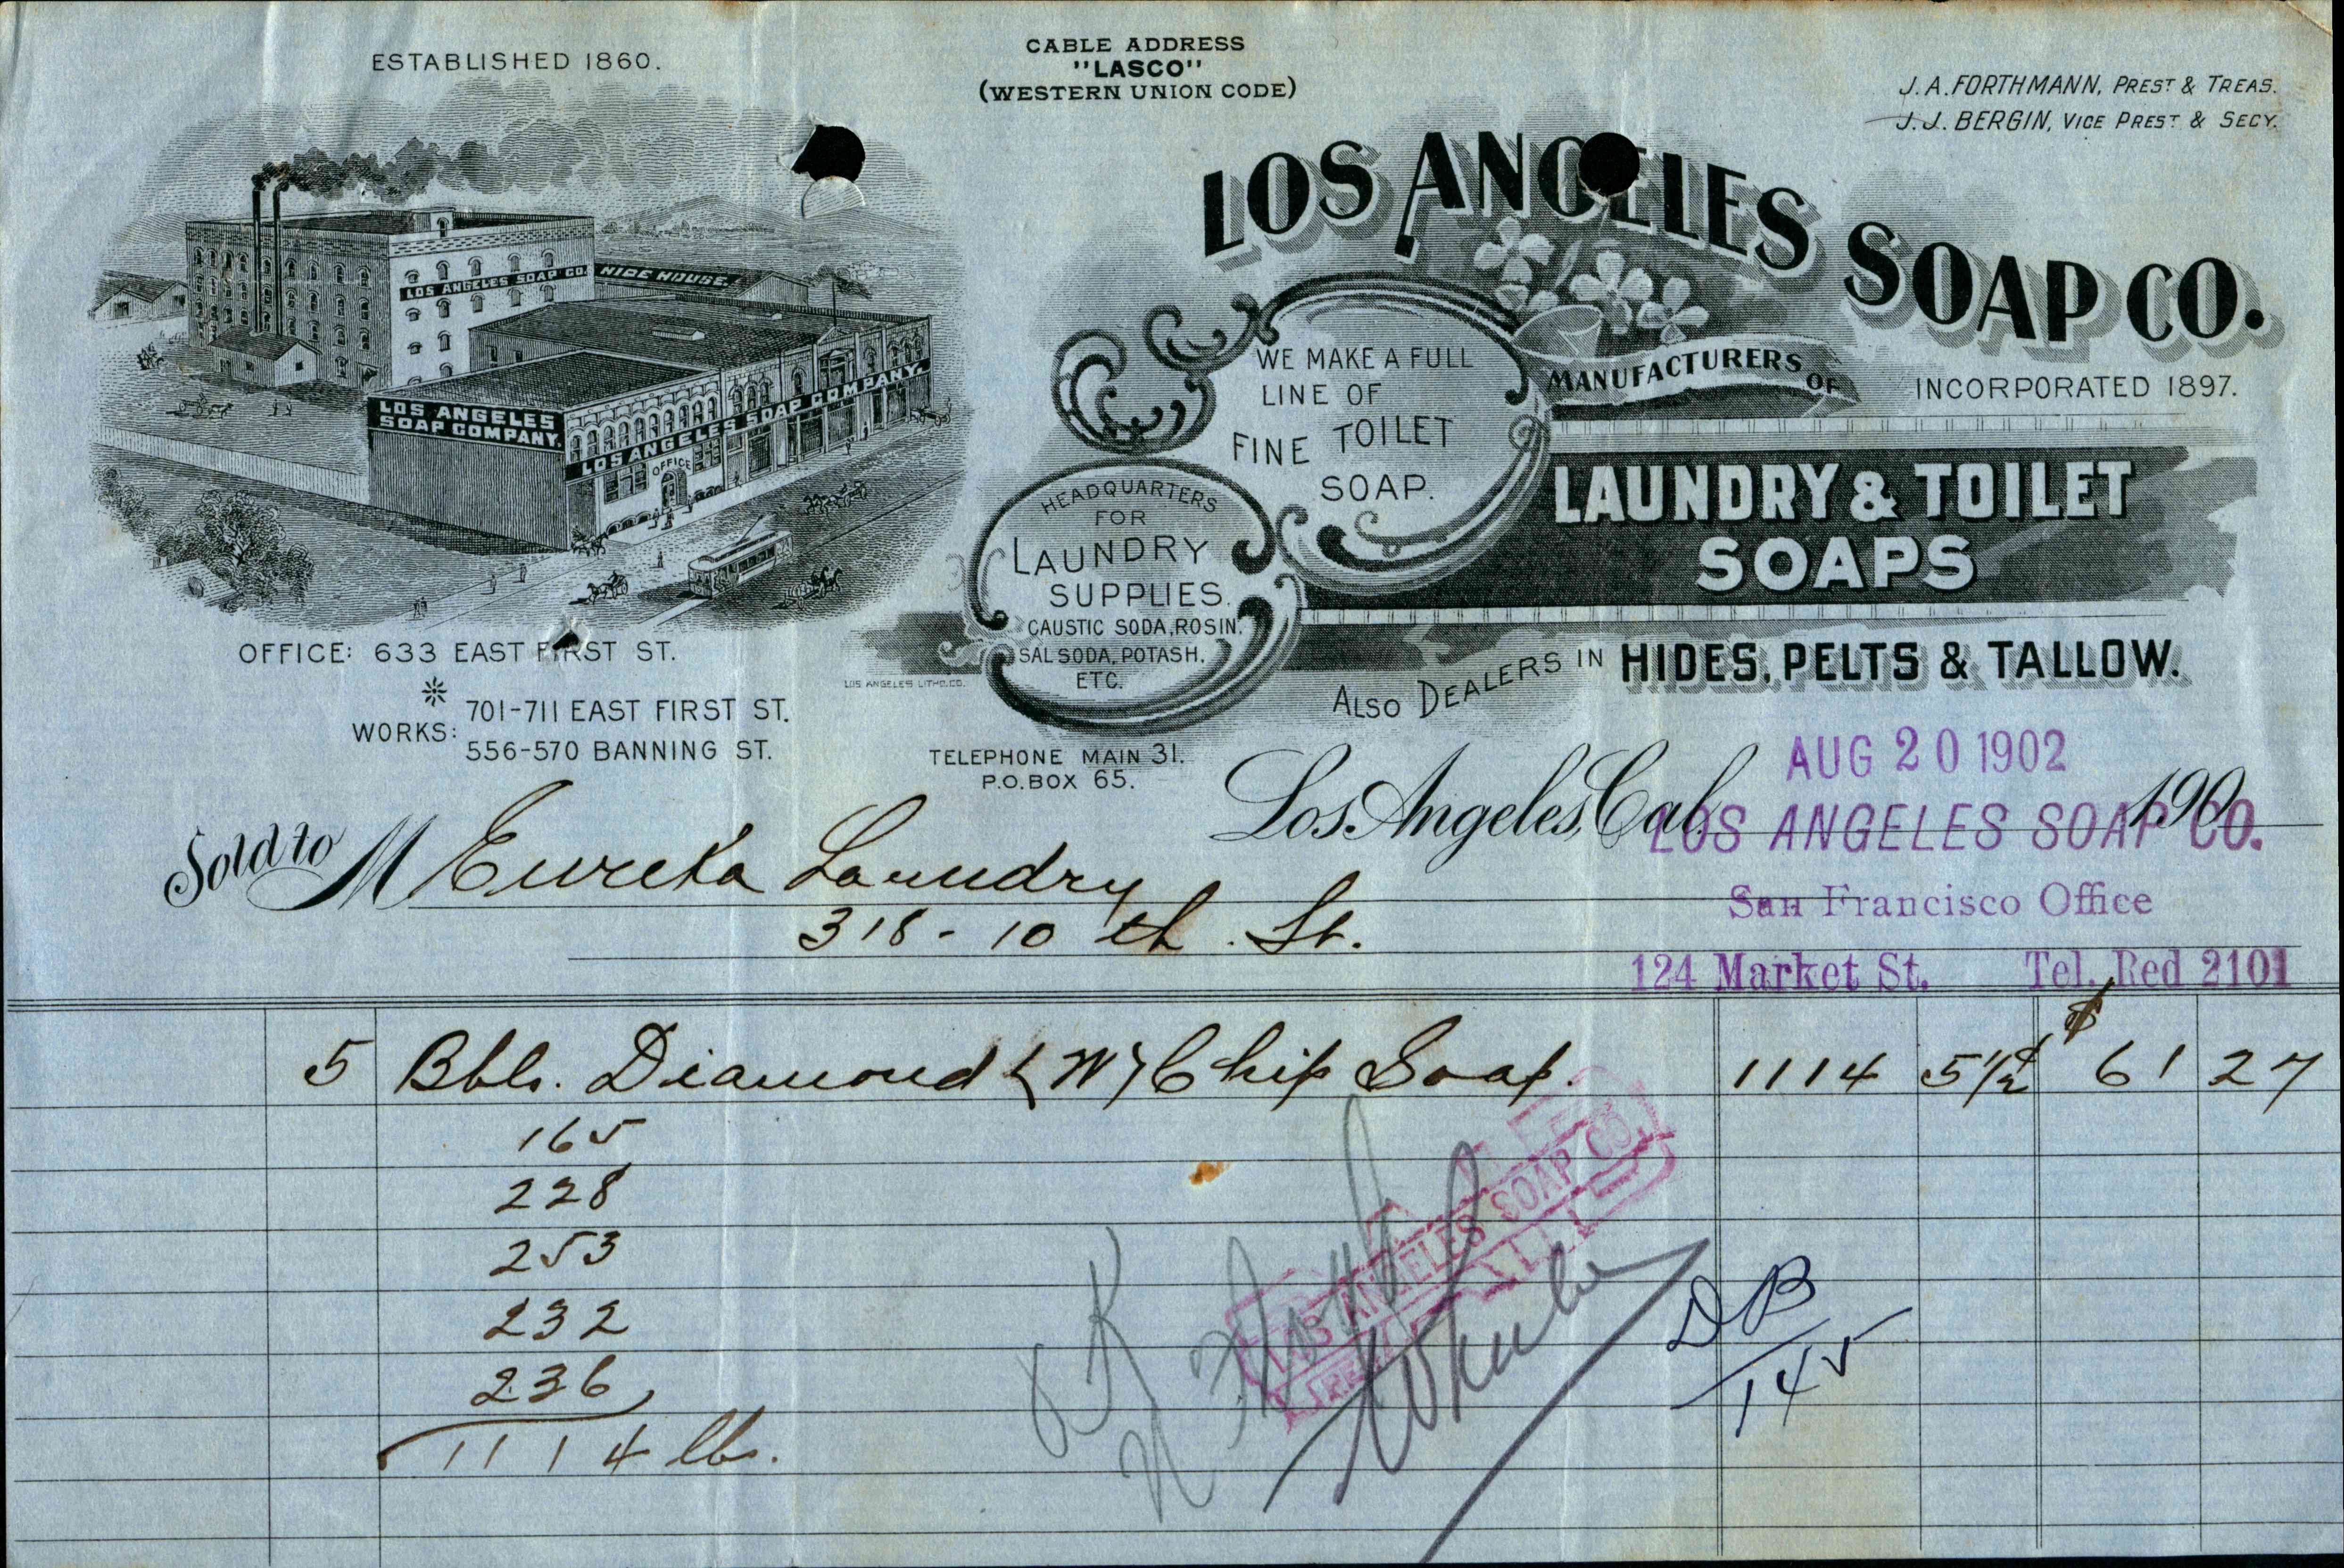 The soap company building on the receipt